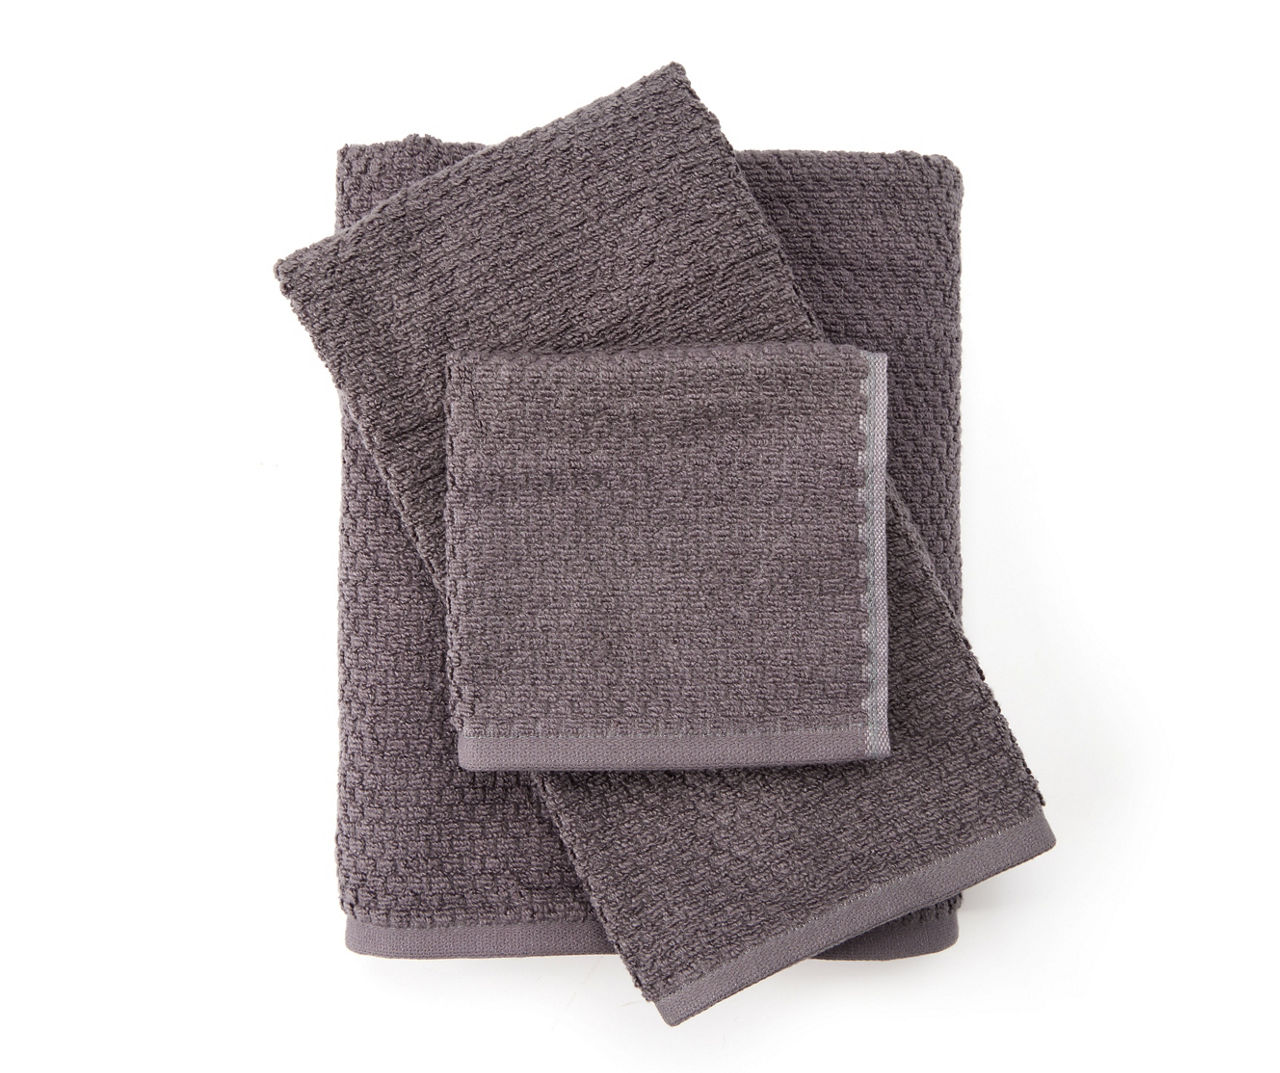 Wild Sage™ Savannah Quick Dry Solid Bath Towel in Charcoal, 1 ct